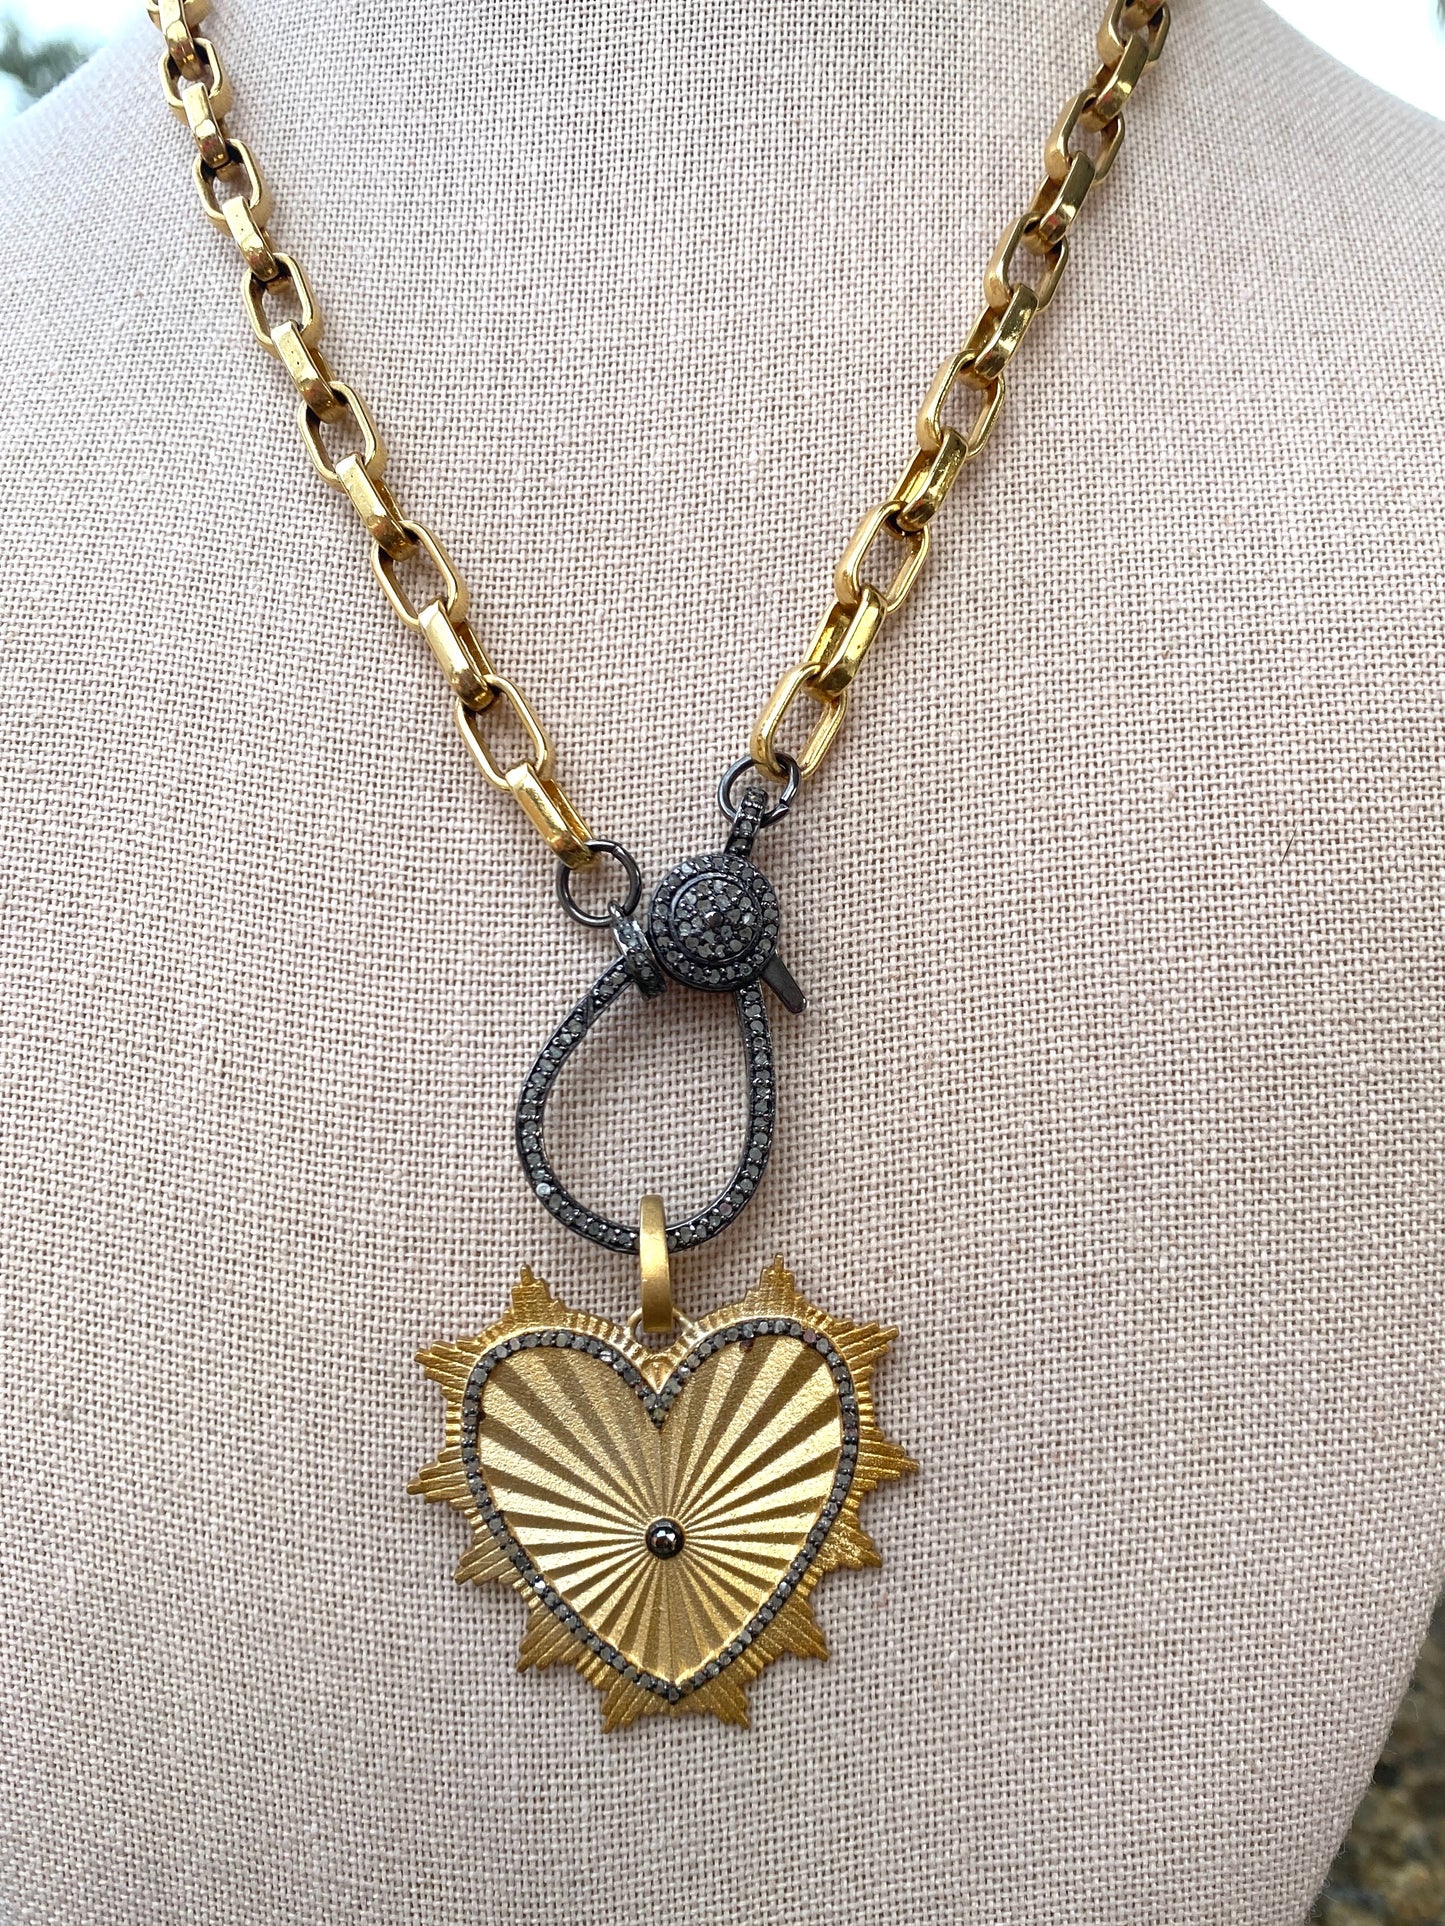 Gold Filled Chain Necklace With Diamond Lobster Clasp and Gold and Diamond Heart Pendant